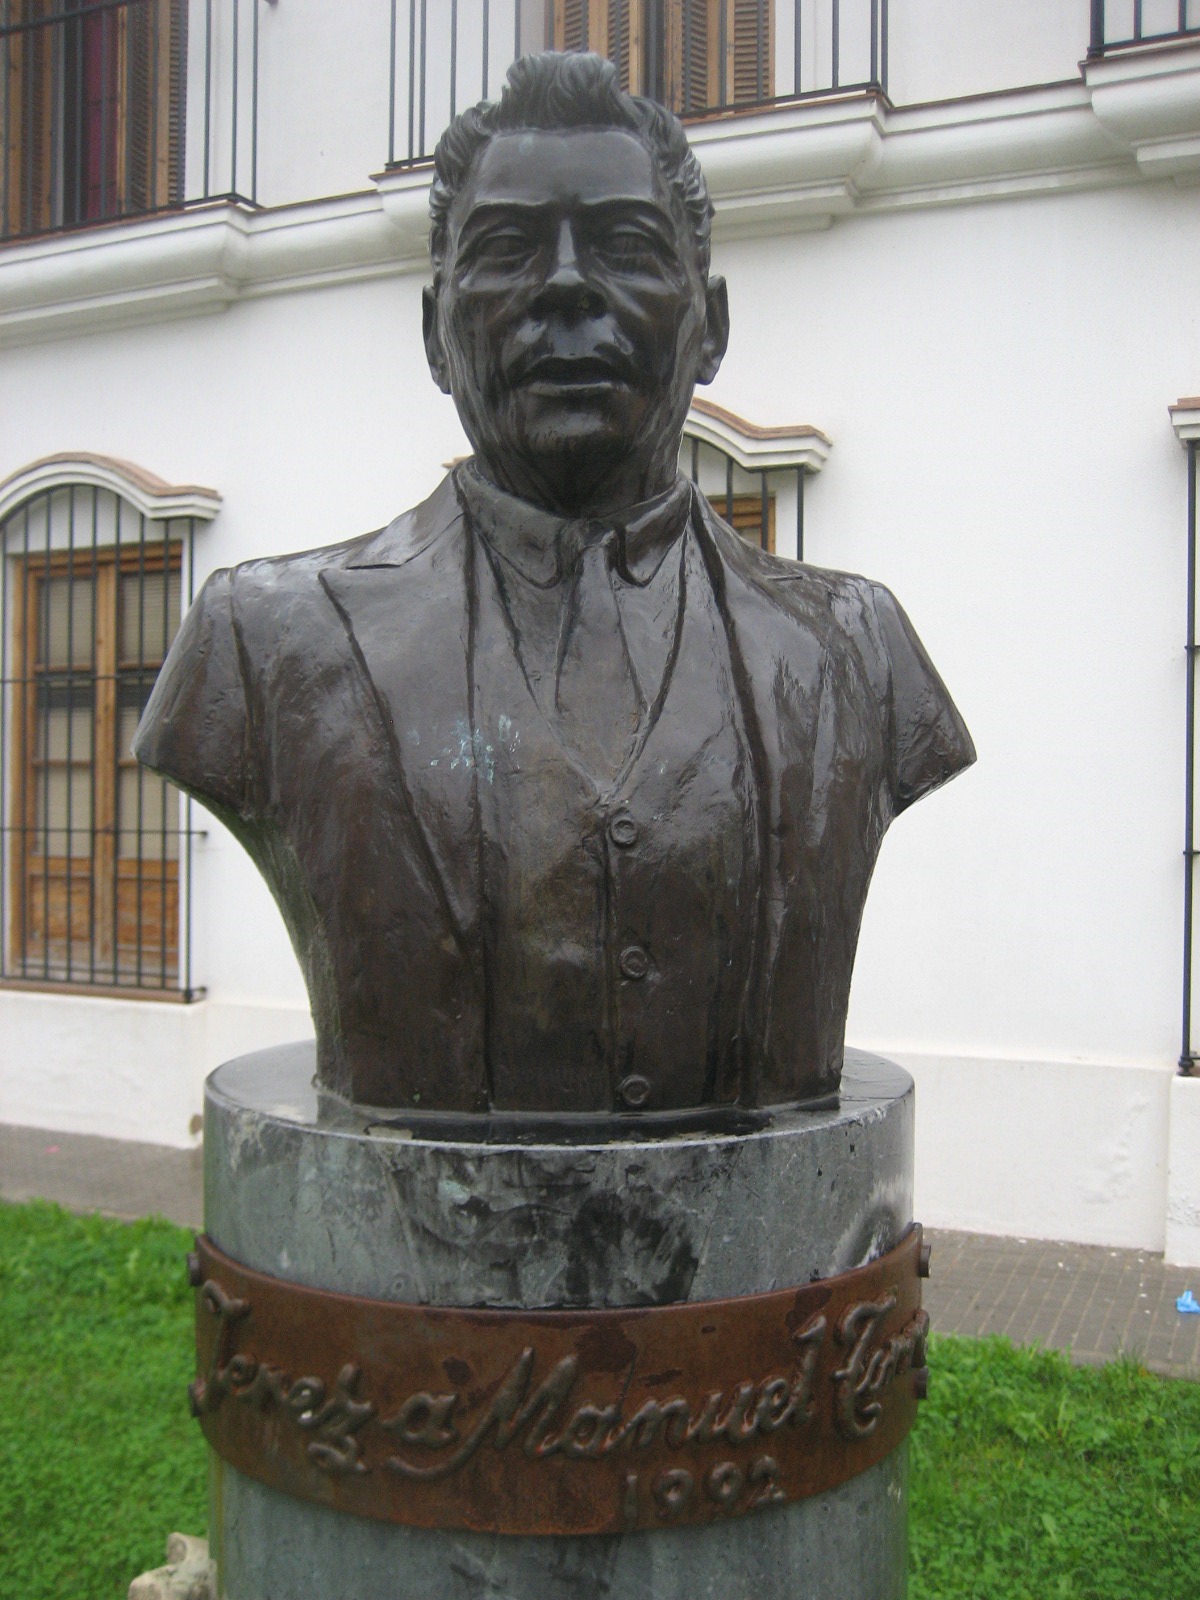 Bust of Manuel Torre, 'Boy from Jerez', installed in his home town.